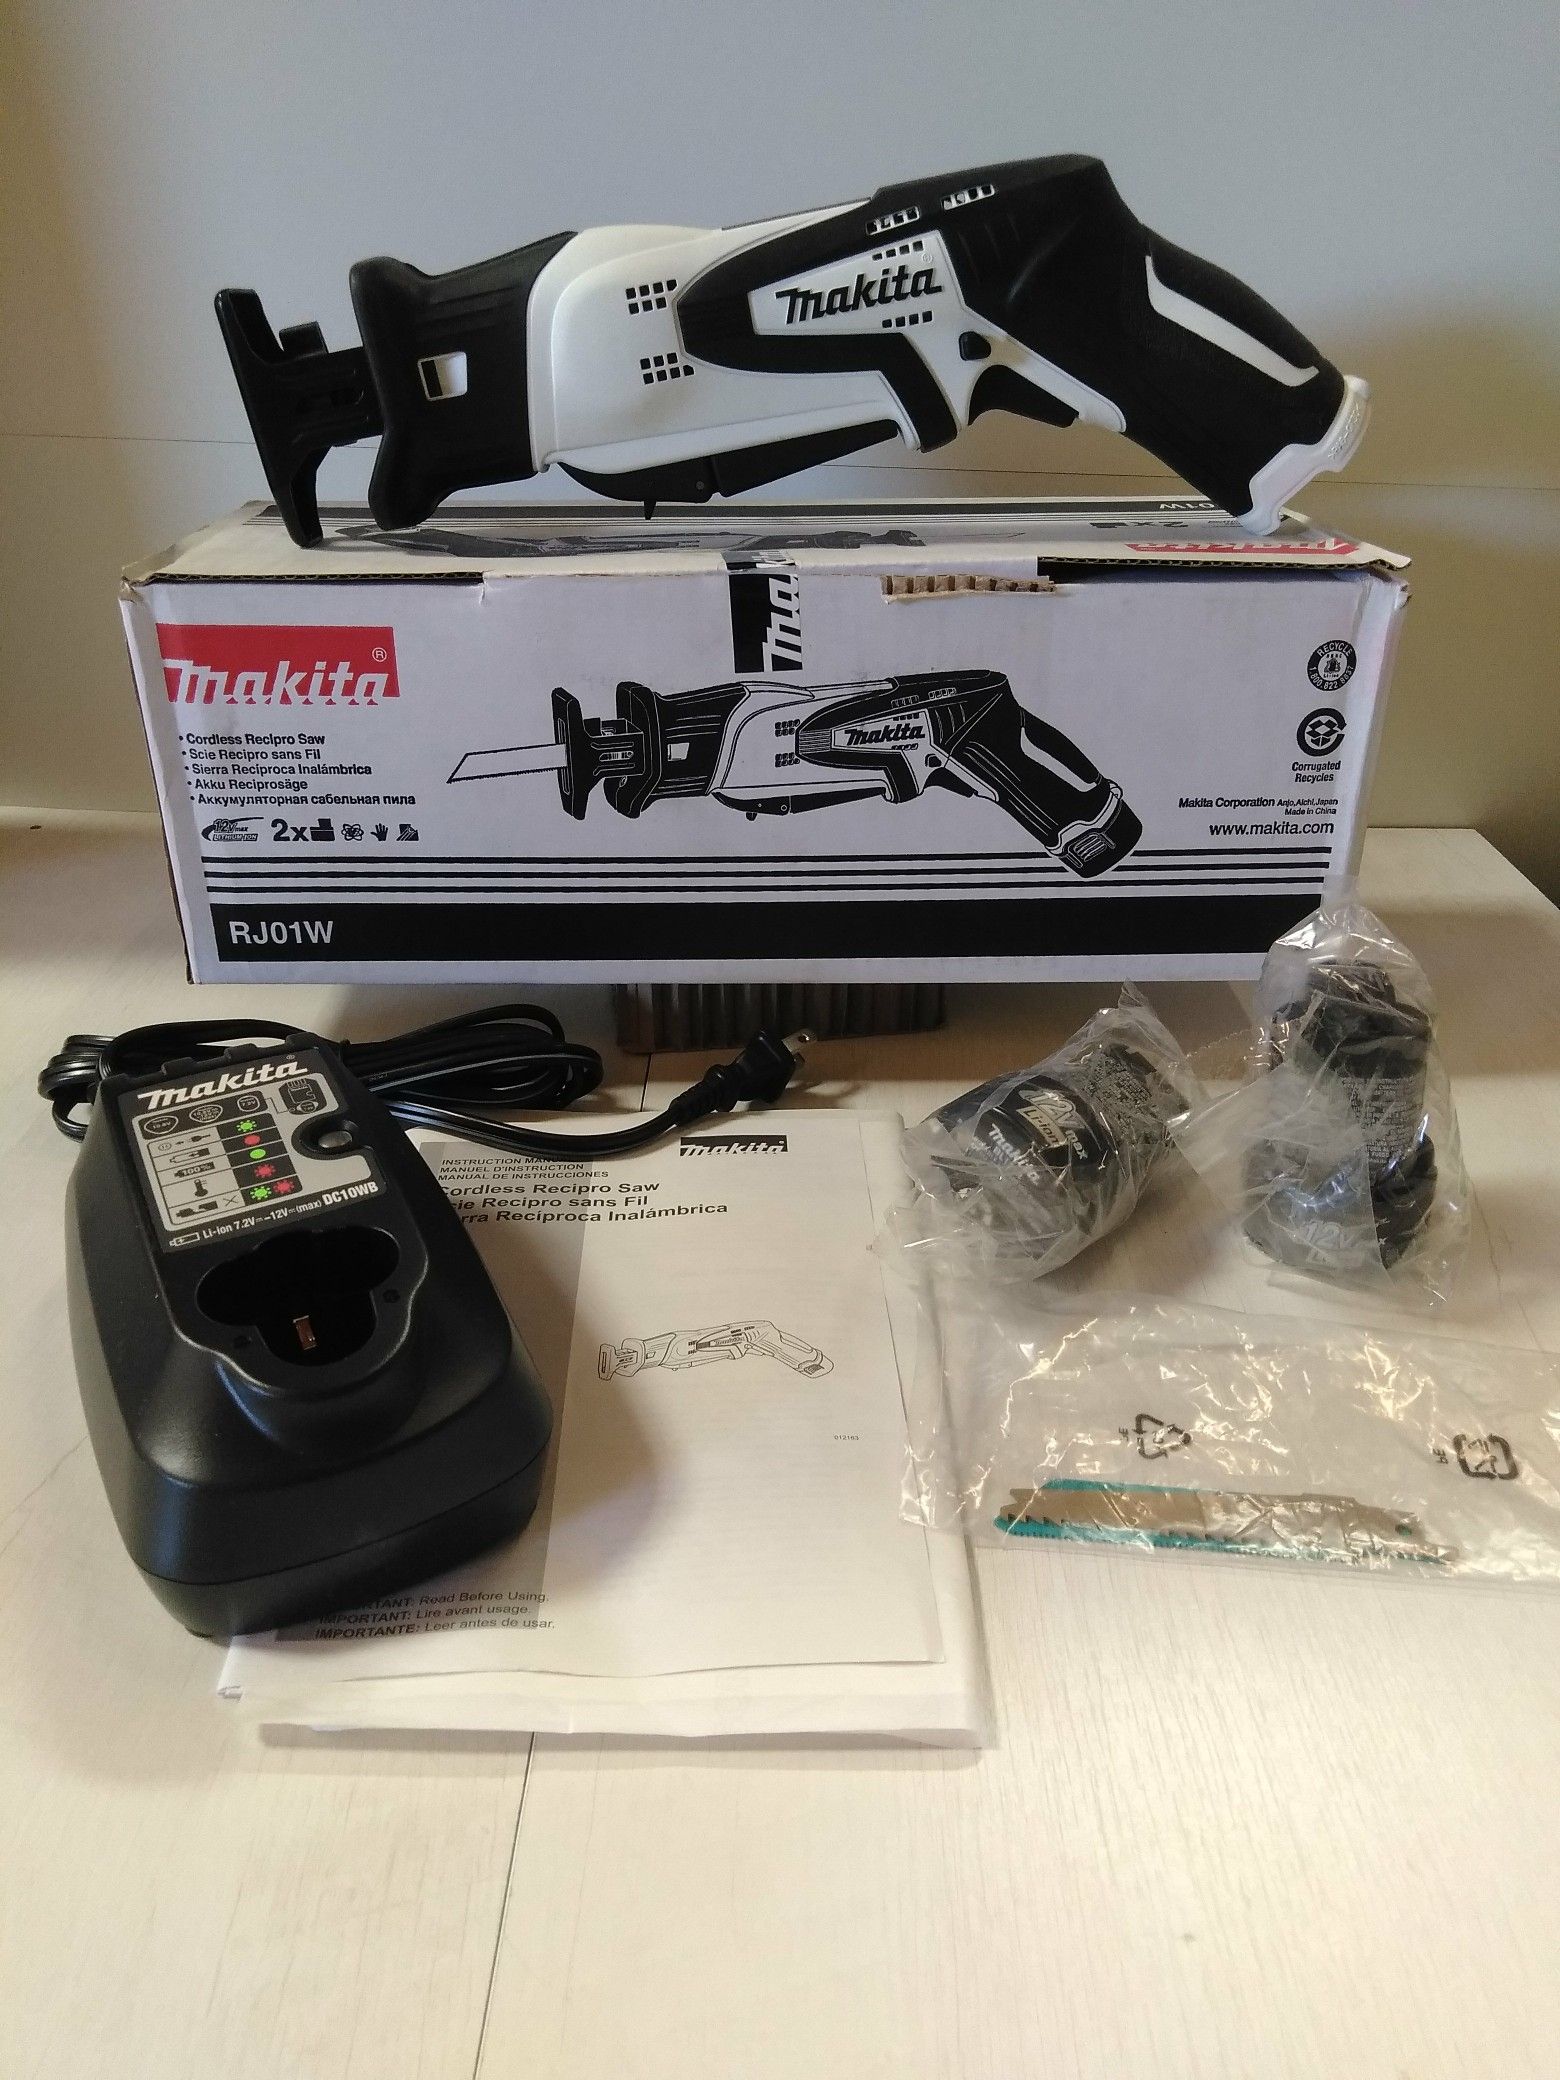 New Makita cordless recipro saw kit with 2 12V batteries and a charger!!!!! Pick up $90 firm!!!! Shipping offer $100